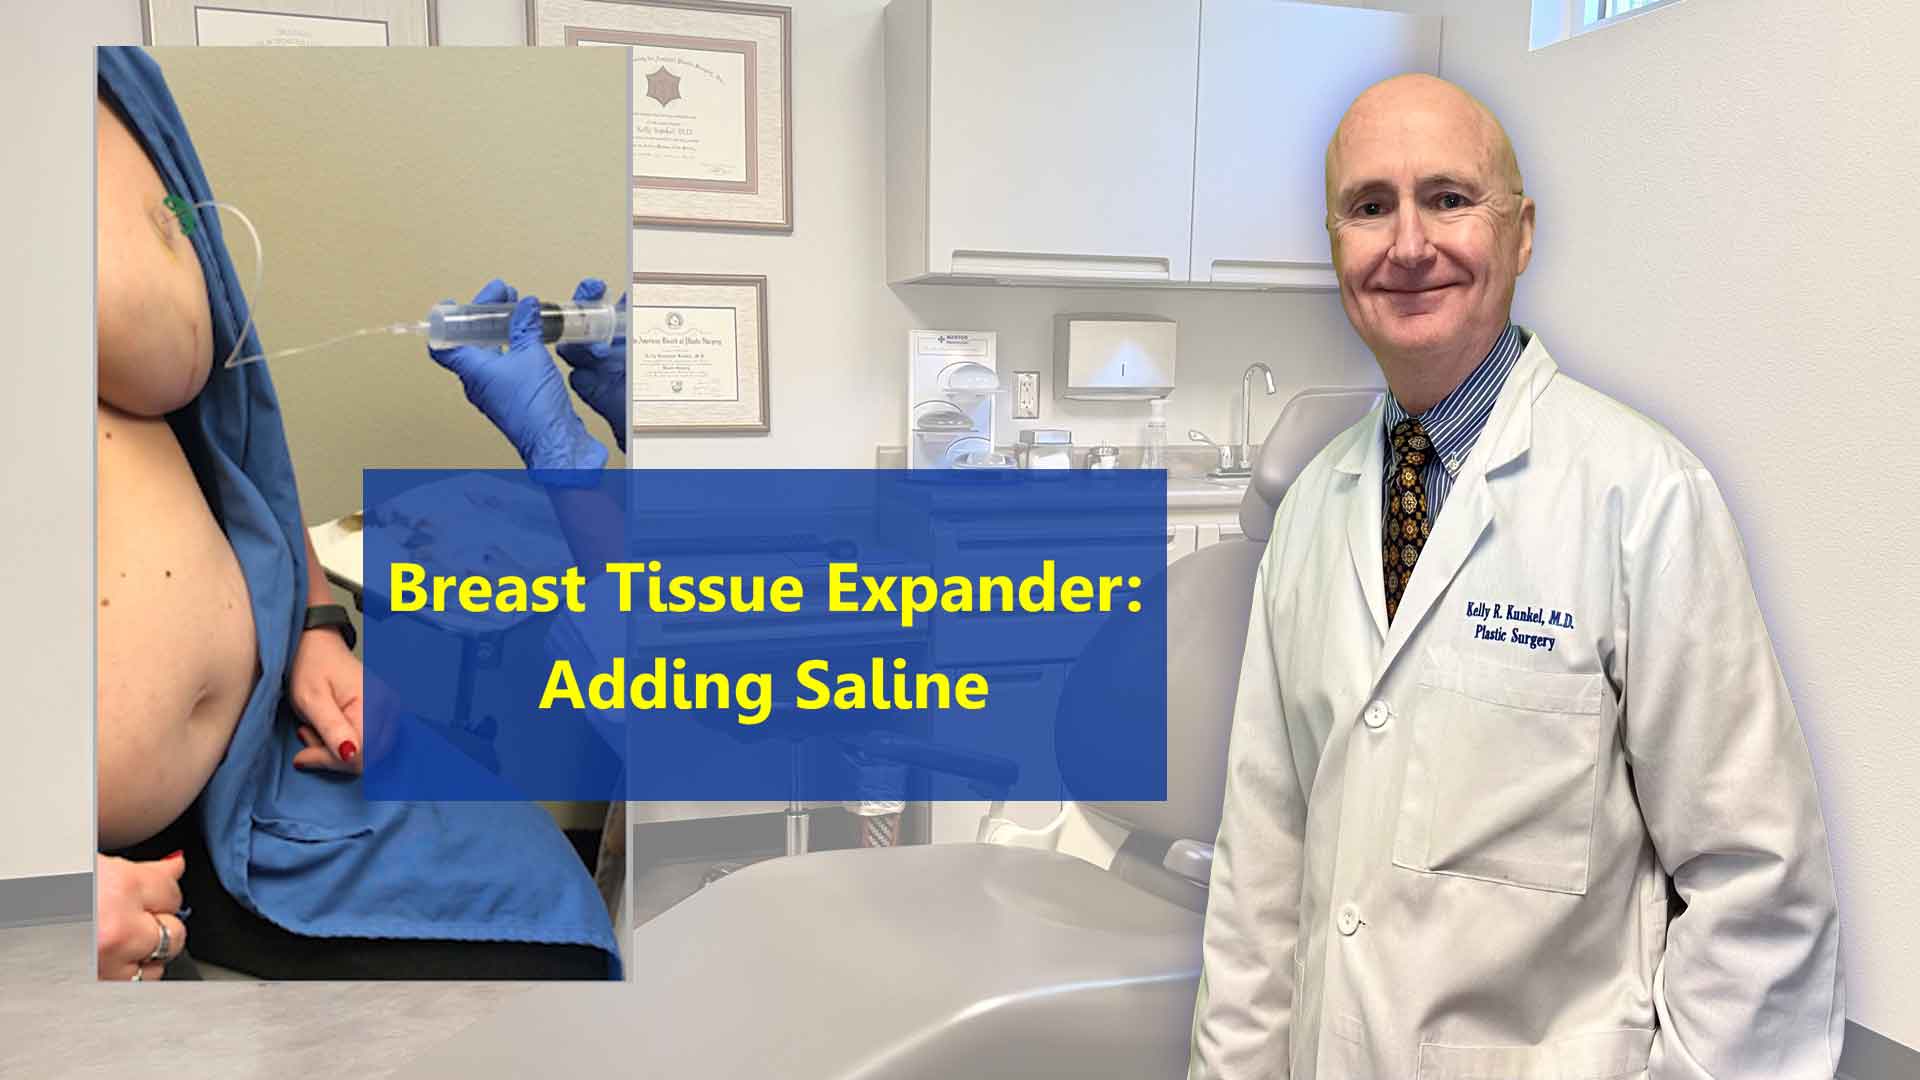 Image of Dr. Kunkel and a patient who is having saline added to her breast tissue expander